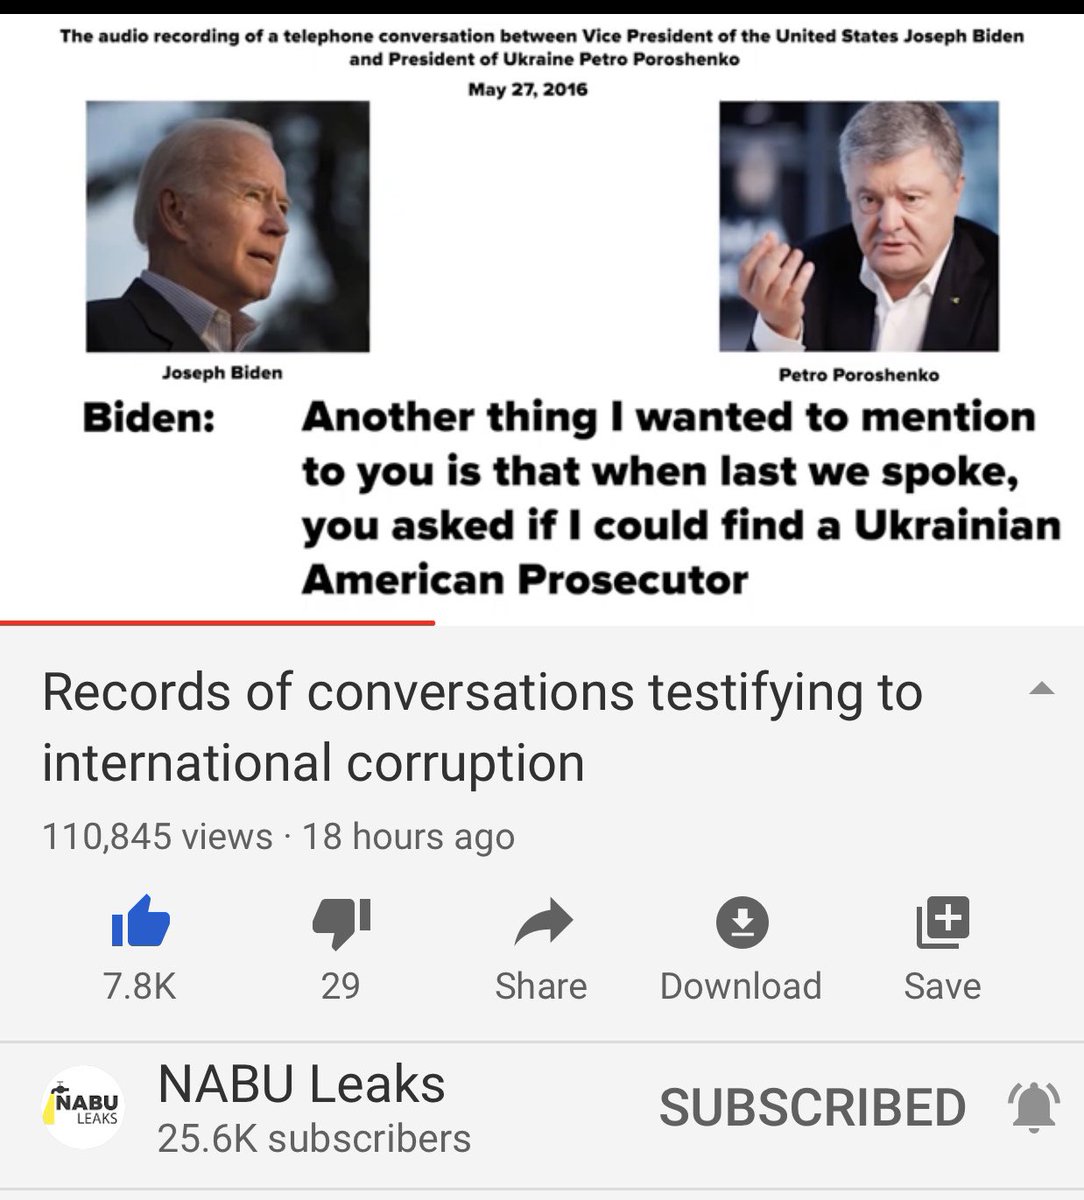 Poroshenko refers to Biden as his “guardian angel” ya who wouldn’t when billions are about to be funneled to you. Anyway Biden mentions the appointment of a Ukrainian American prosecutor to “help” out in Ukraine. He wants someone to cover up his laundering. These ppl are sick